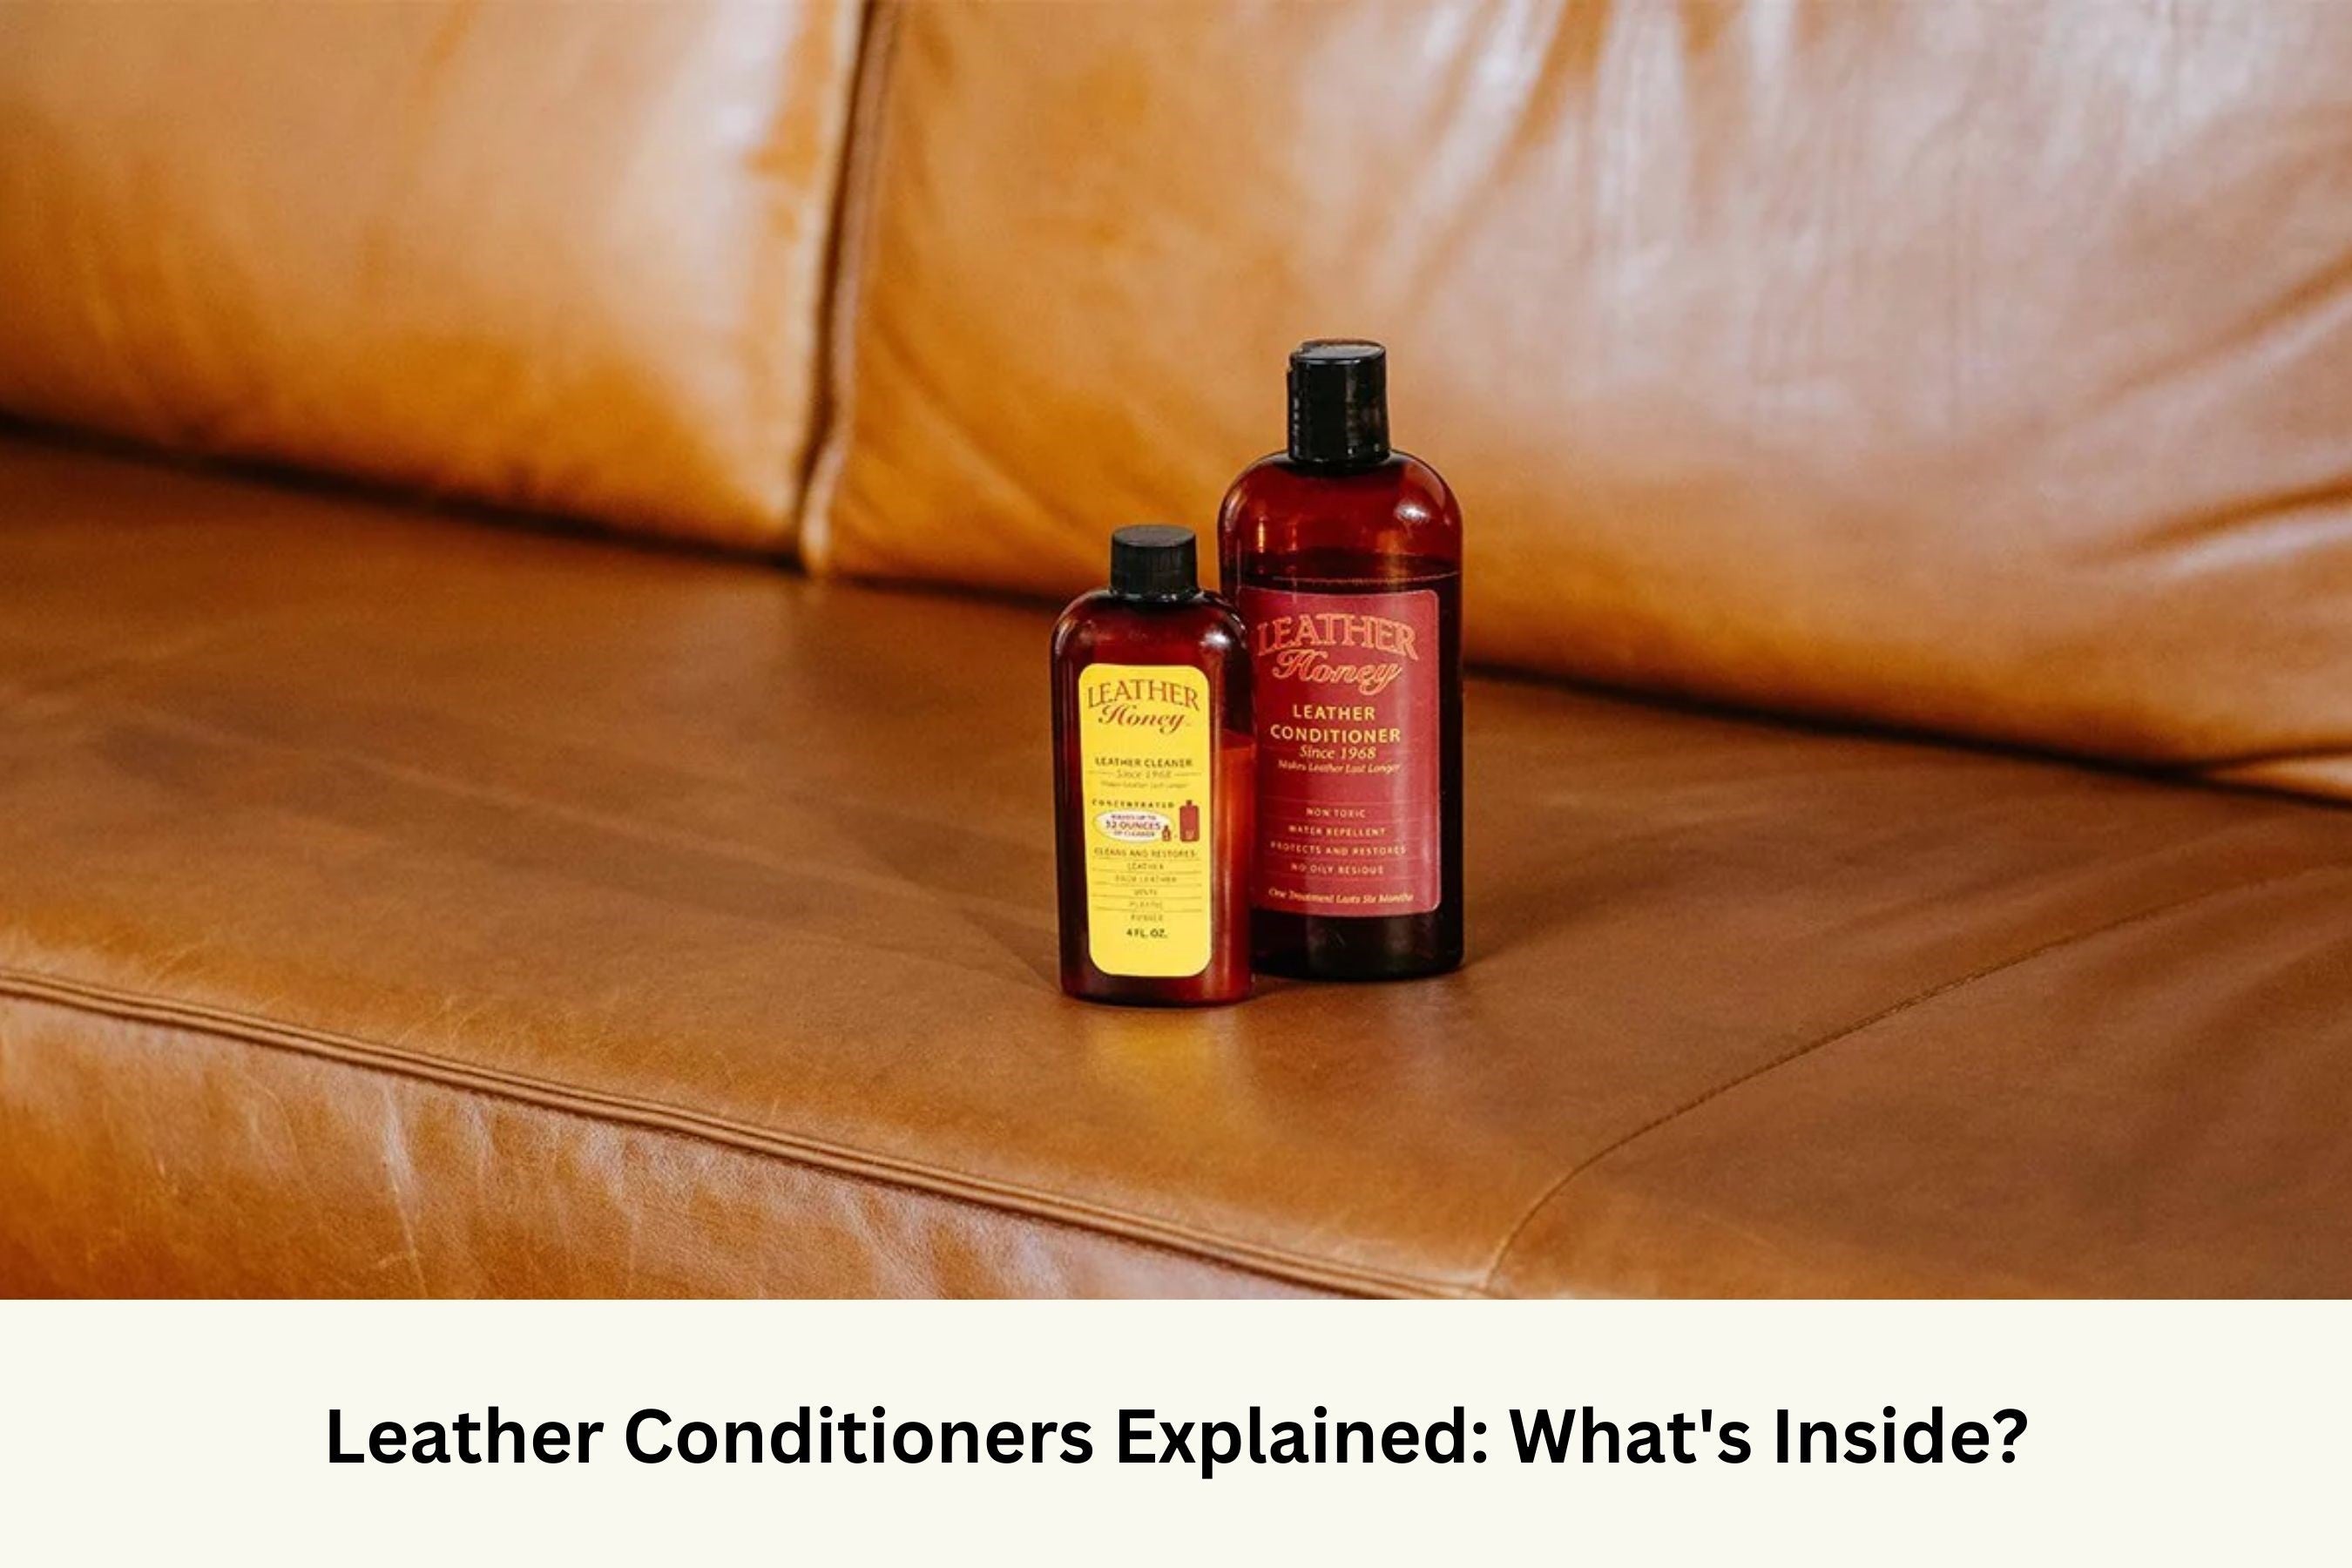 Leather conditioners explained: what's inside?